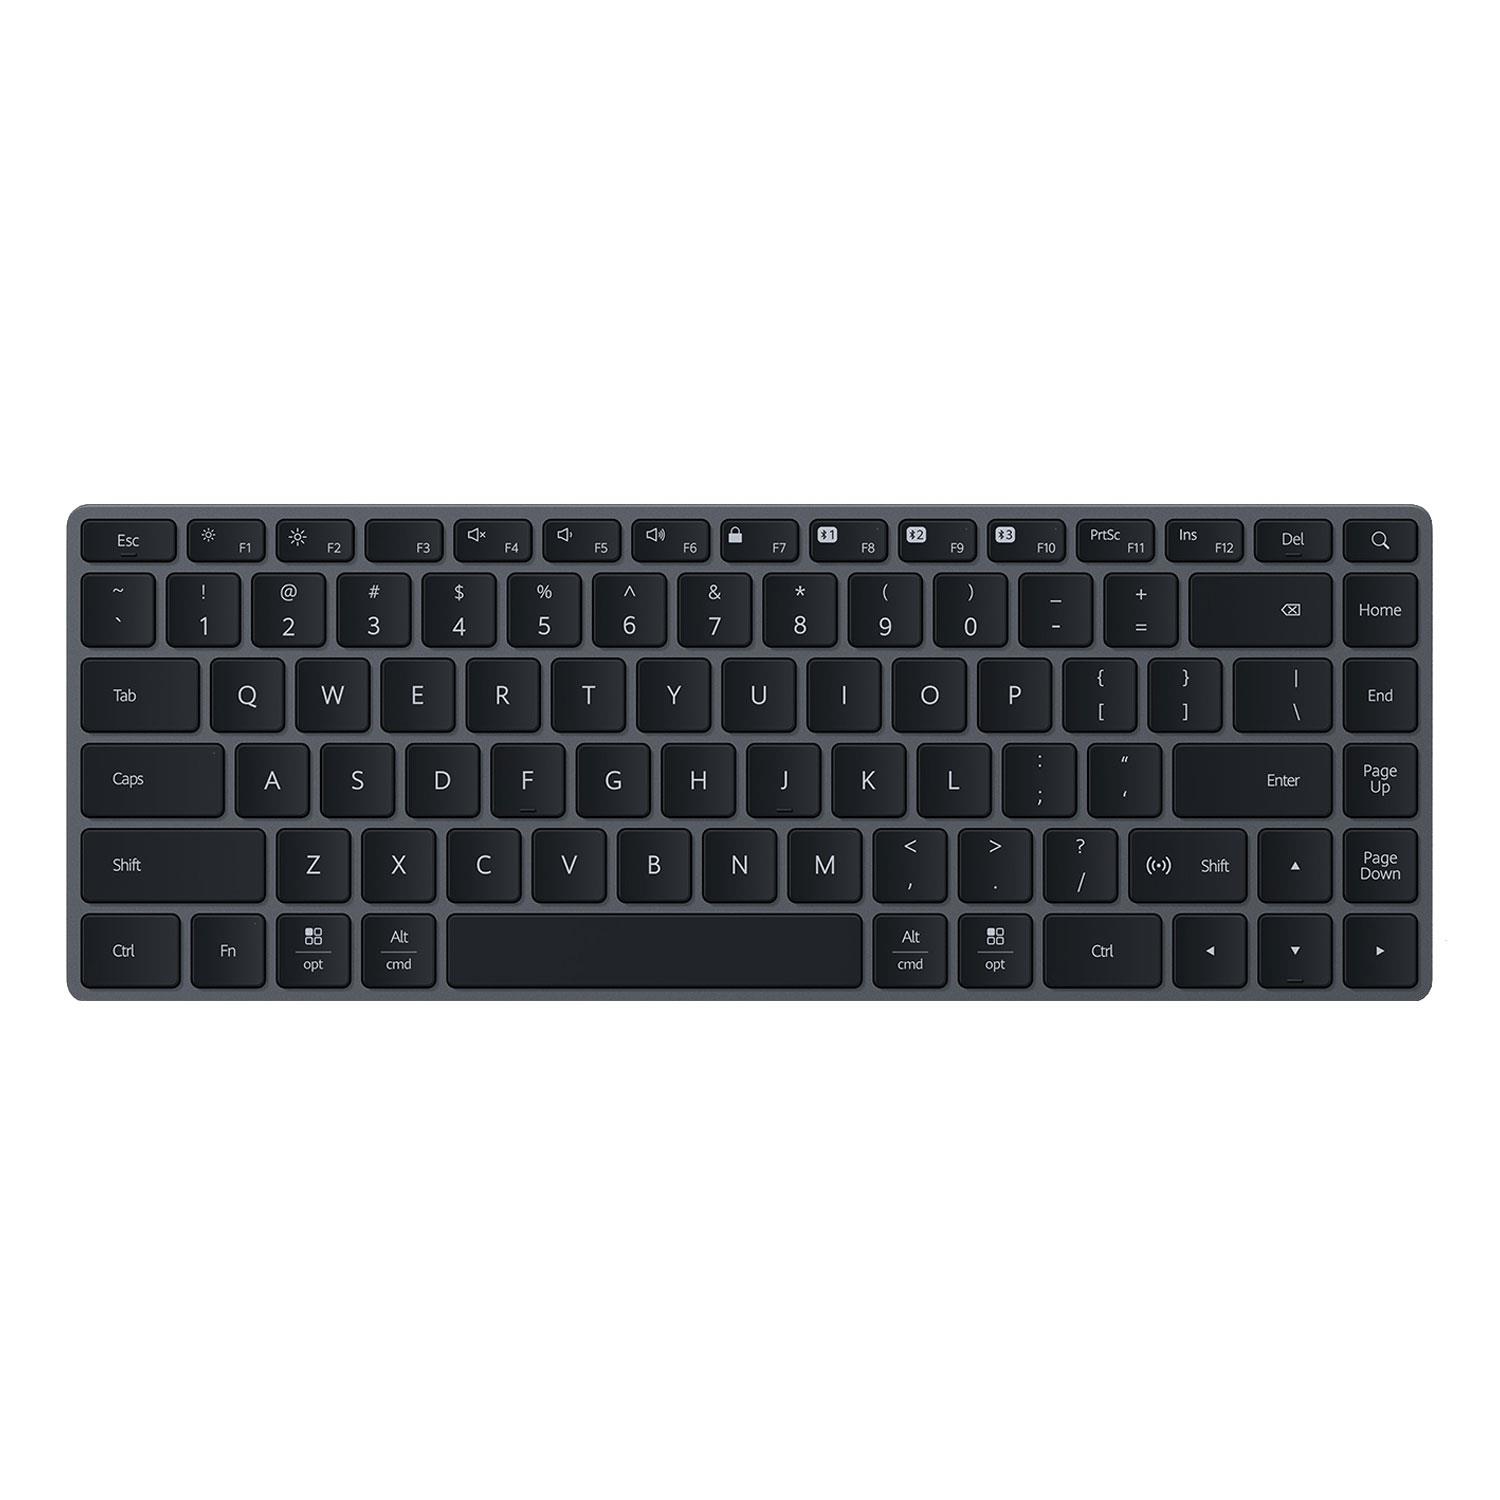 HUAWEI Ultrathin Wireless Bluetooth Keyboard - USB-C Port, Flash-Switch, Long Battery, NFC, Aluminum Alloy Cover, Plastic Lower Shell, Space Gray